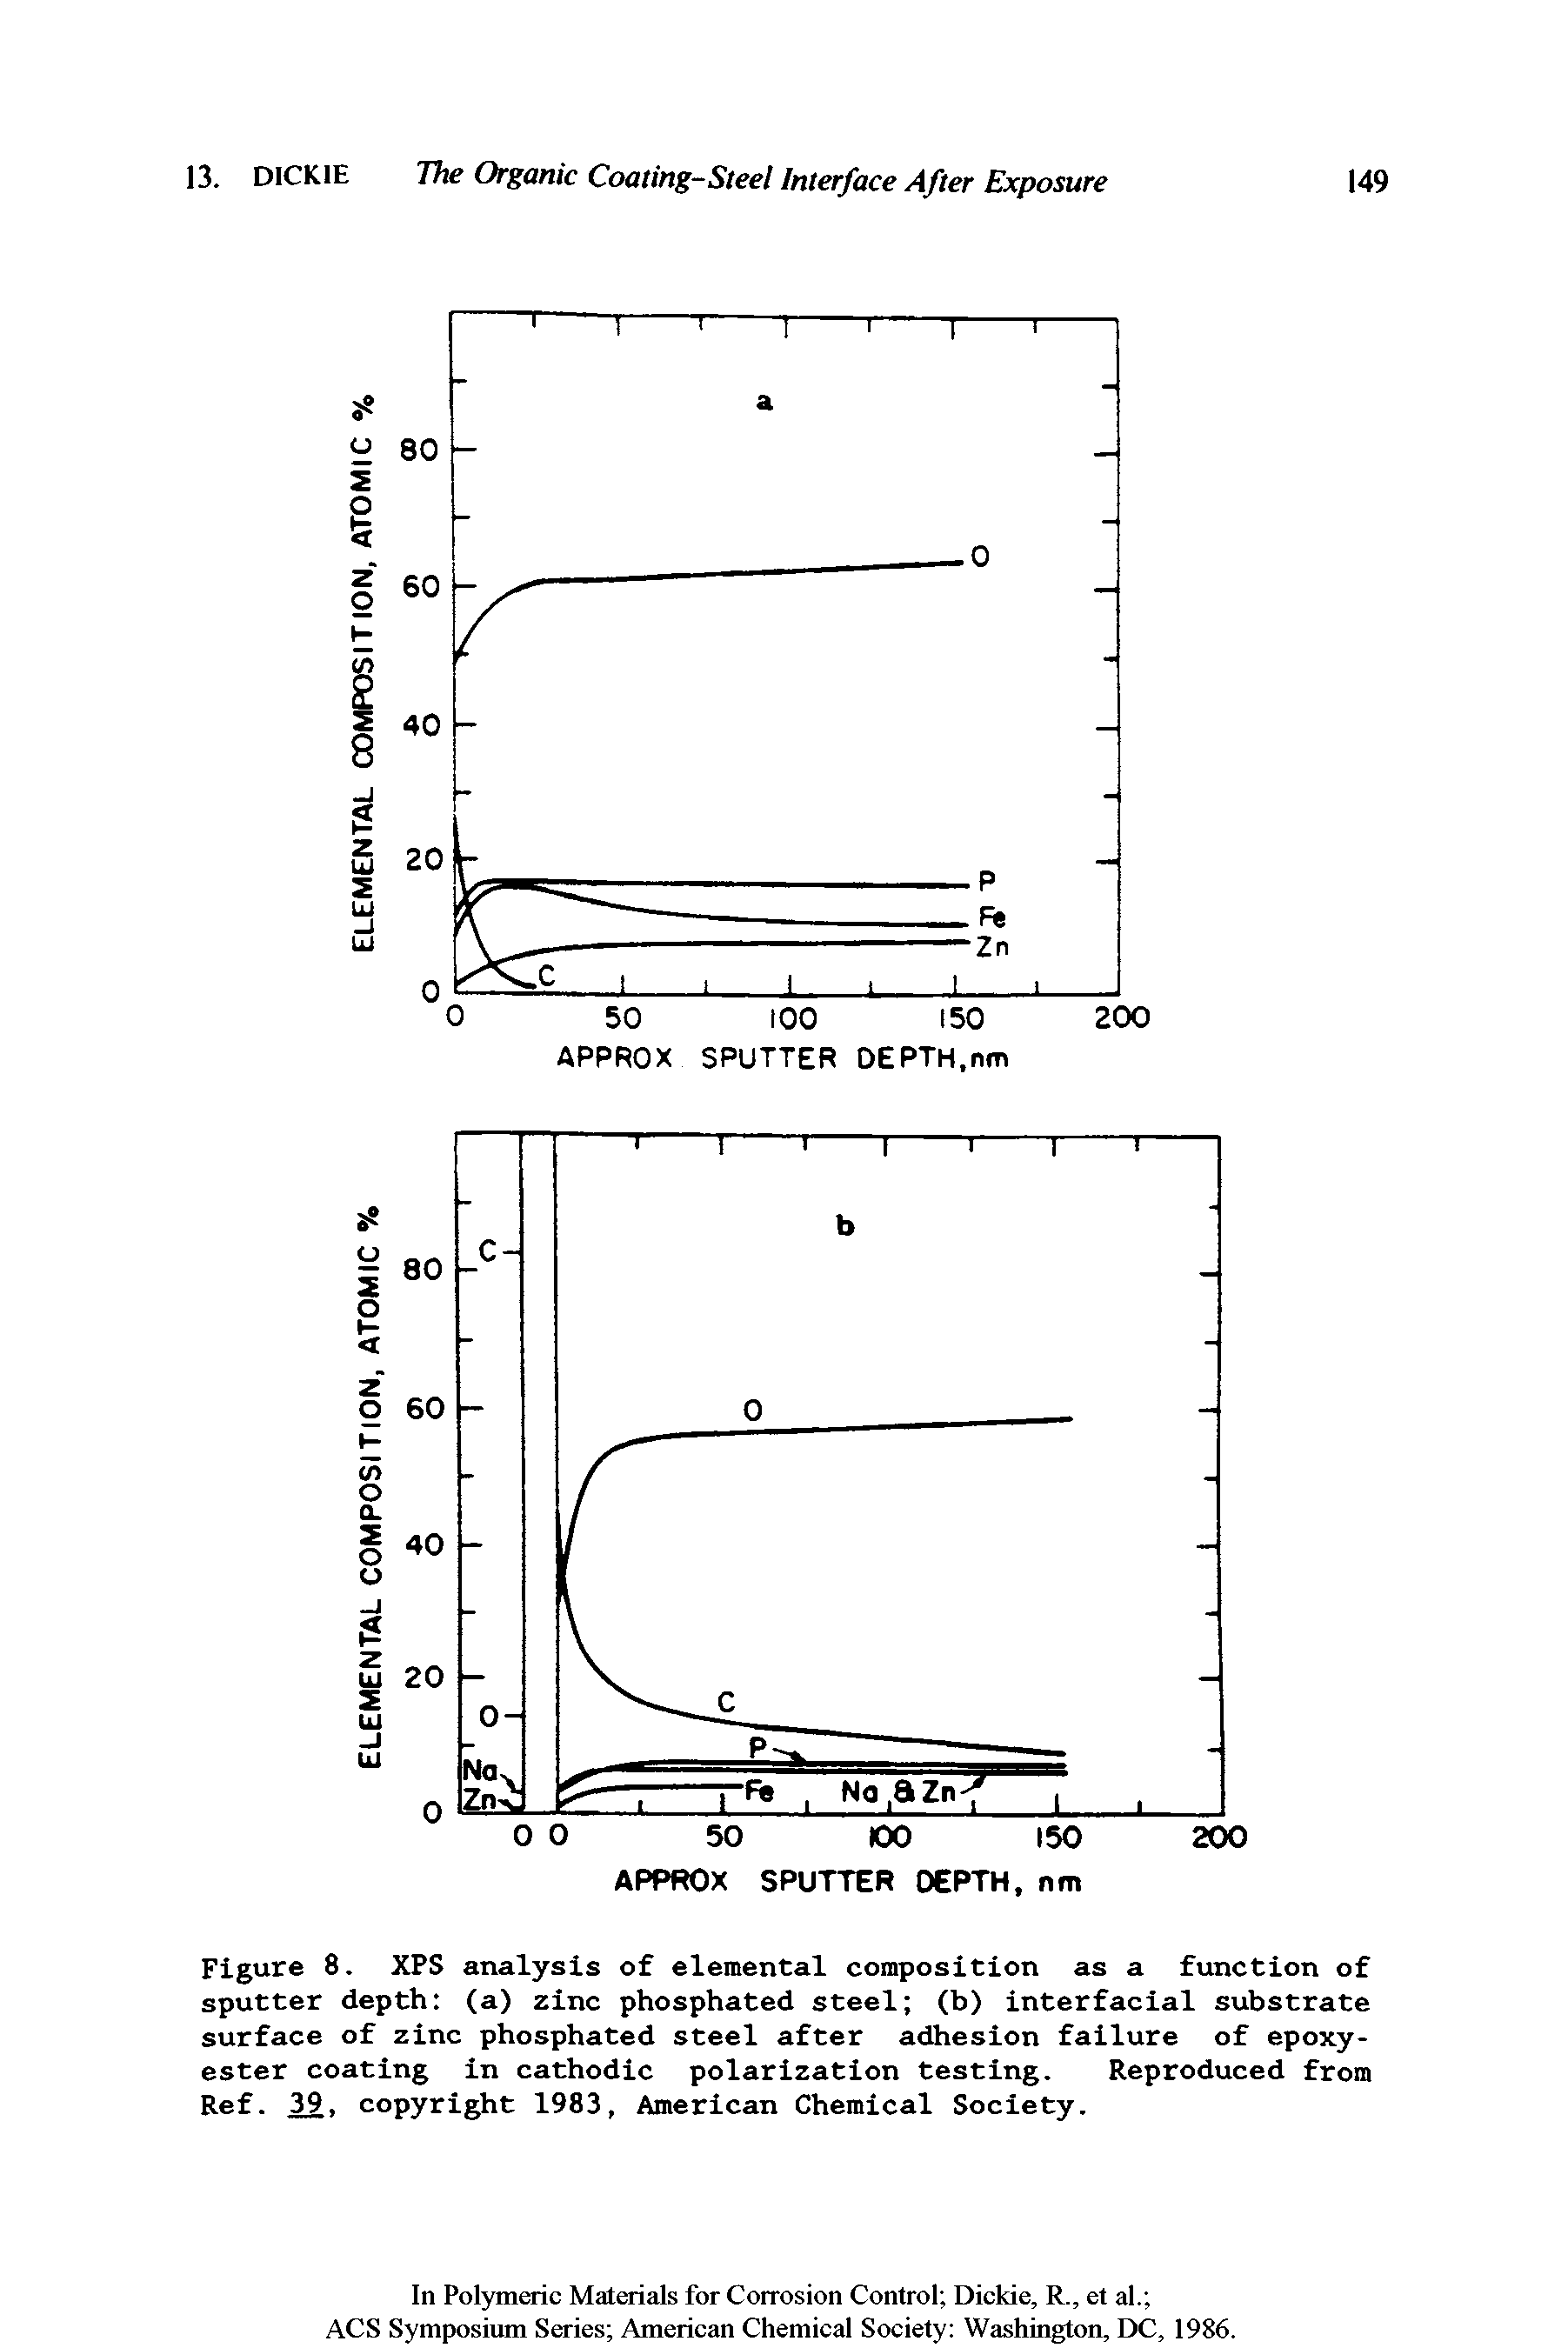 Figure 8. XPS analysis of elemental composition as a function of sputter depth (a) zinc phosphated steel (b) interfacial substrate surface of zinc phosphated steel after adhesion failure of epoxyester coating in cathodic polarization testing. Reproduced from Ref. copyright 1983, American Chemical Society.